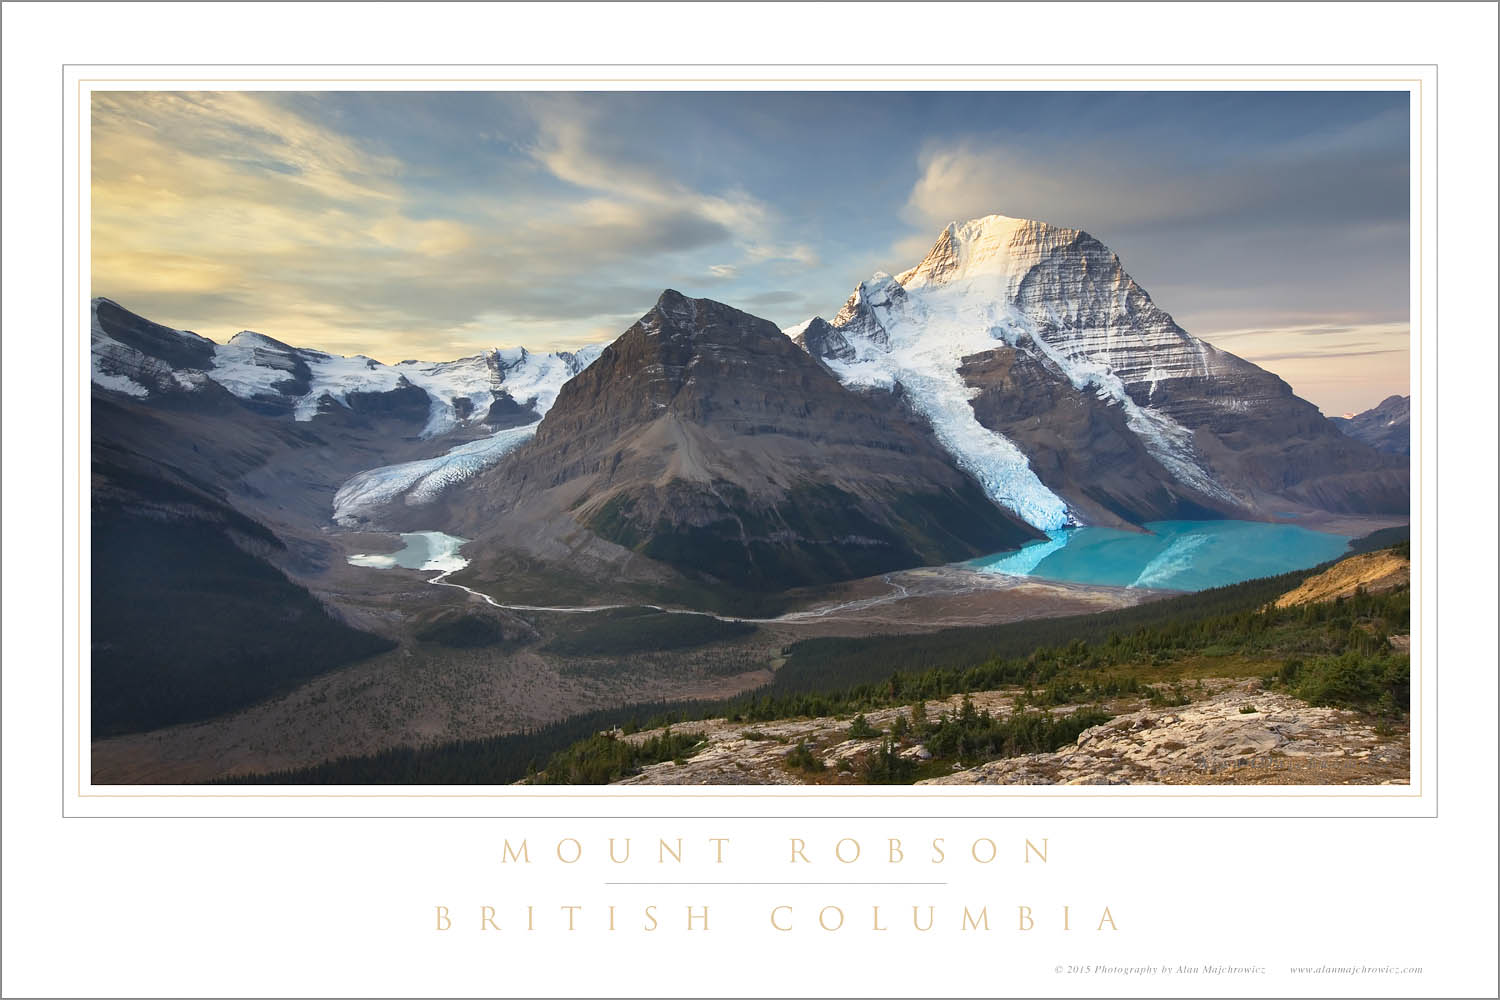 Mount Robson, highest mountain in the Canadian Rockies, elevation 3,954 m (12,972 ft), seen from Mumm Basin, Mount Robson Provincial Park British Columbia